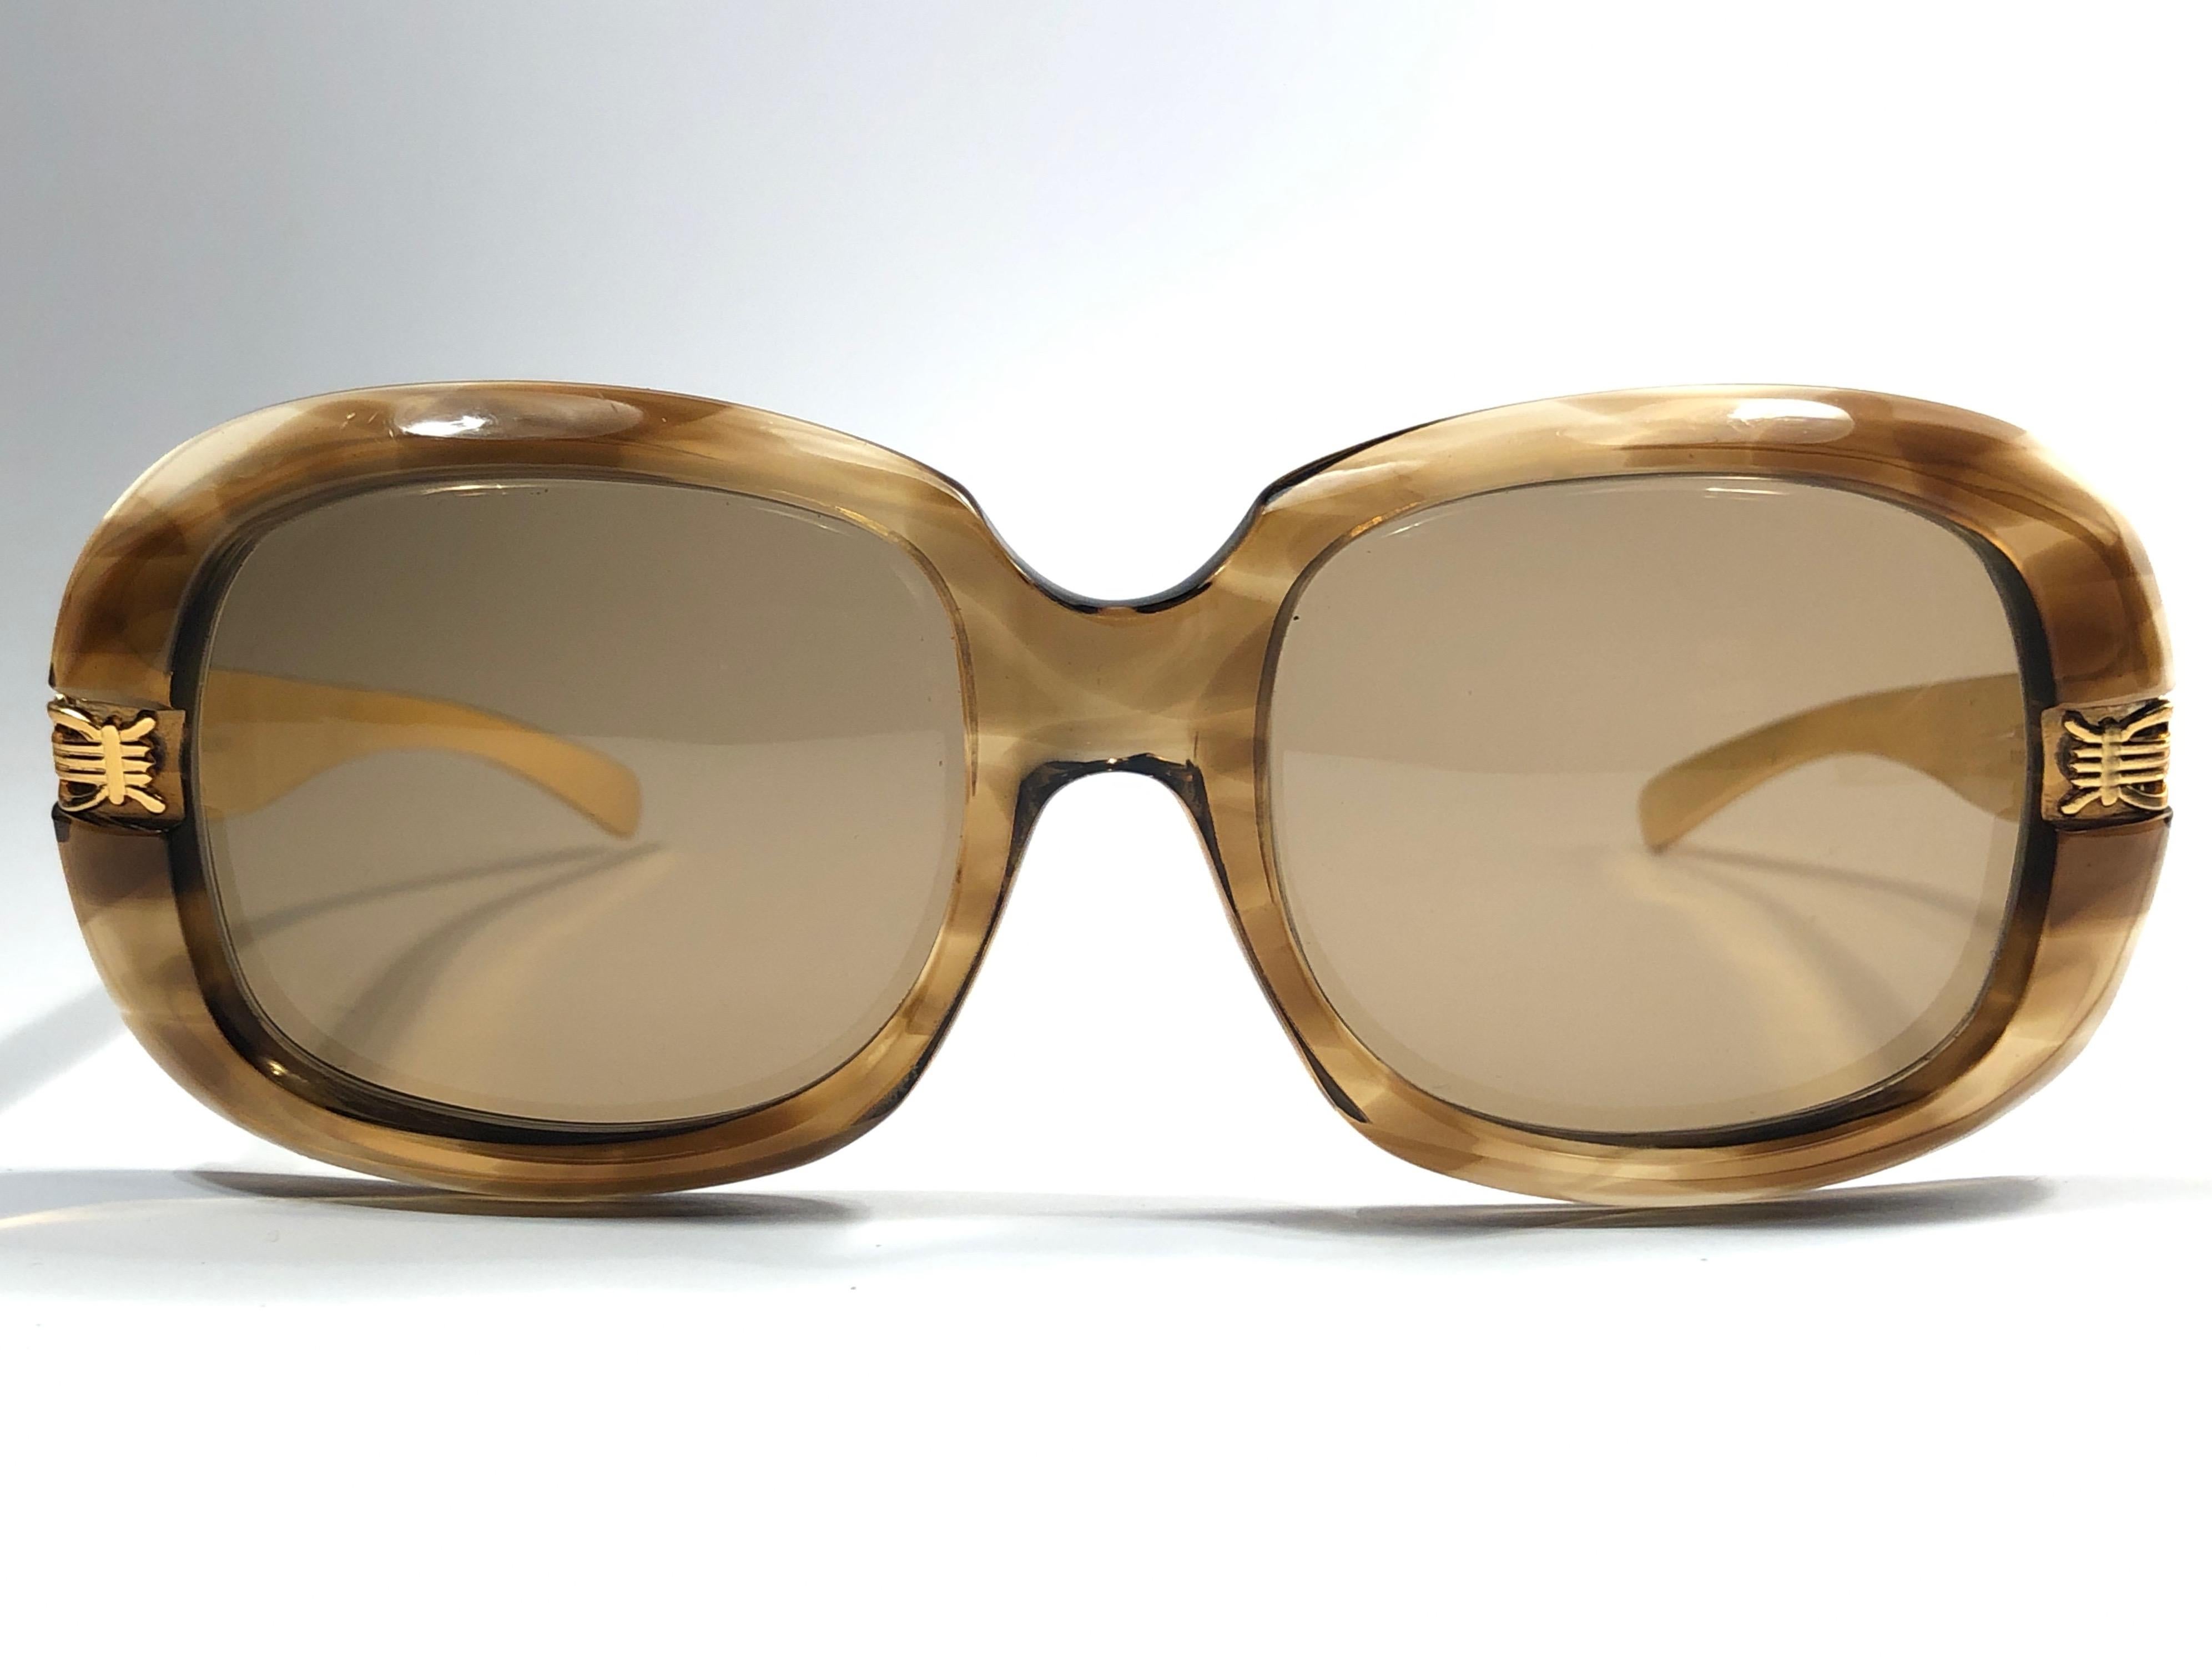 Rare pair of Oliver Goldsmith sunglasses. 

Oversized translucent frame with gold Errebi sides.

A seldom and unique piece in very good vintage condition. The Frame has light sign of wear, hair like scratches on the frame. Spotless medium brown